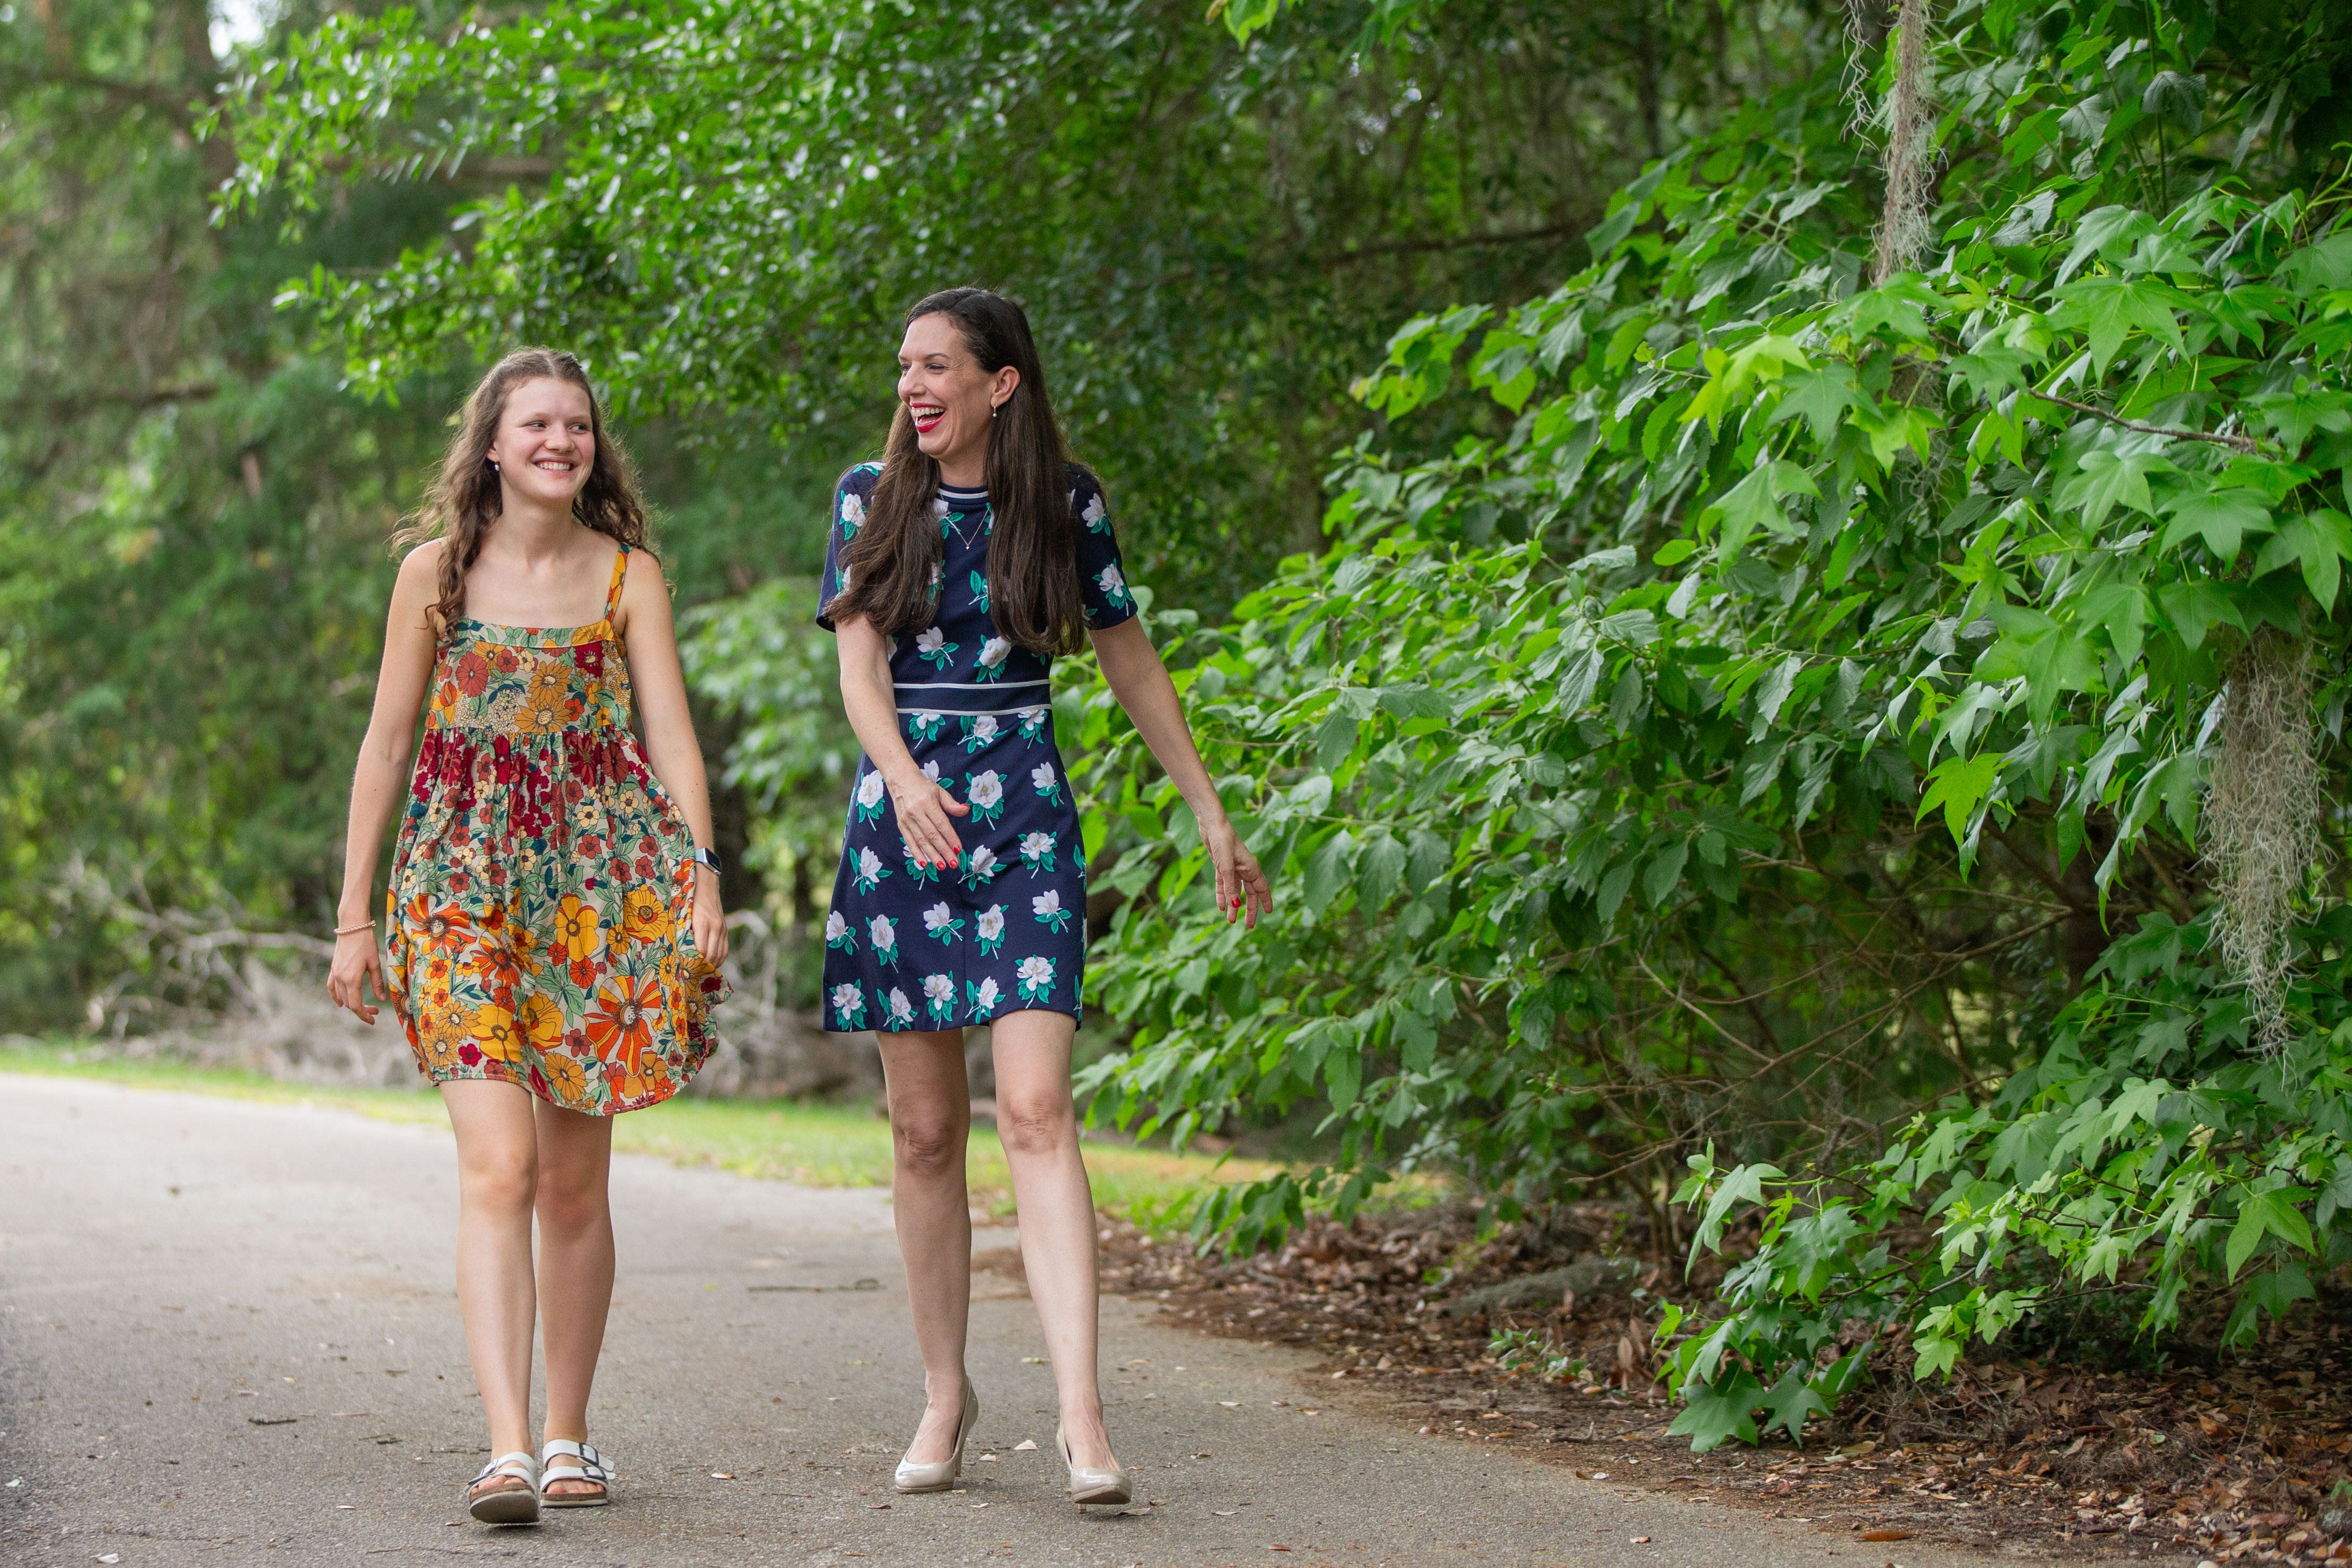 From homeschooling to Mount Holyoke, Emma Cate Duggar goes to historic women's college